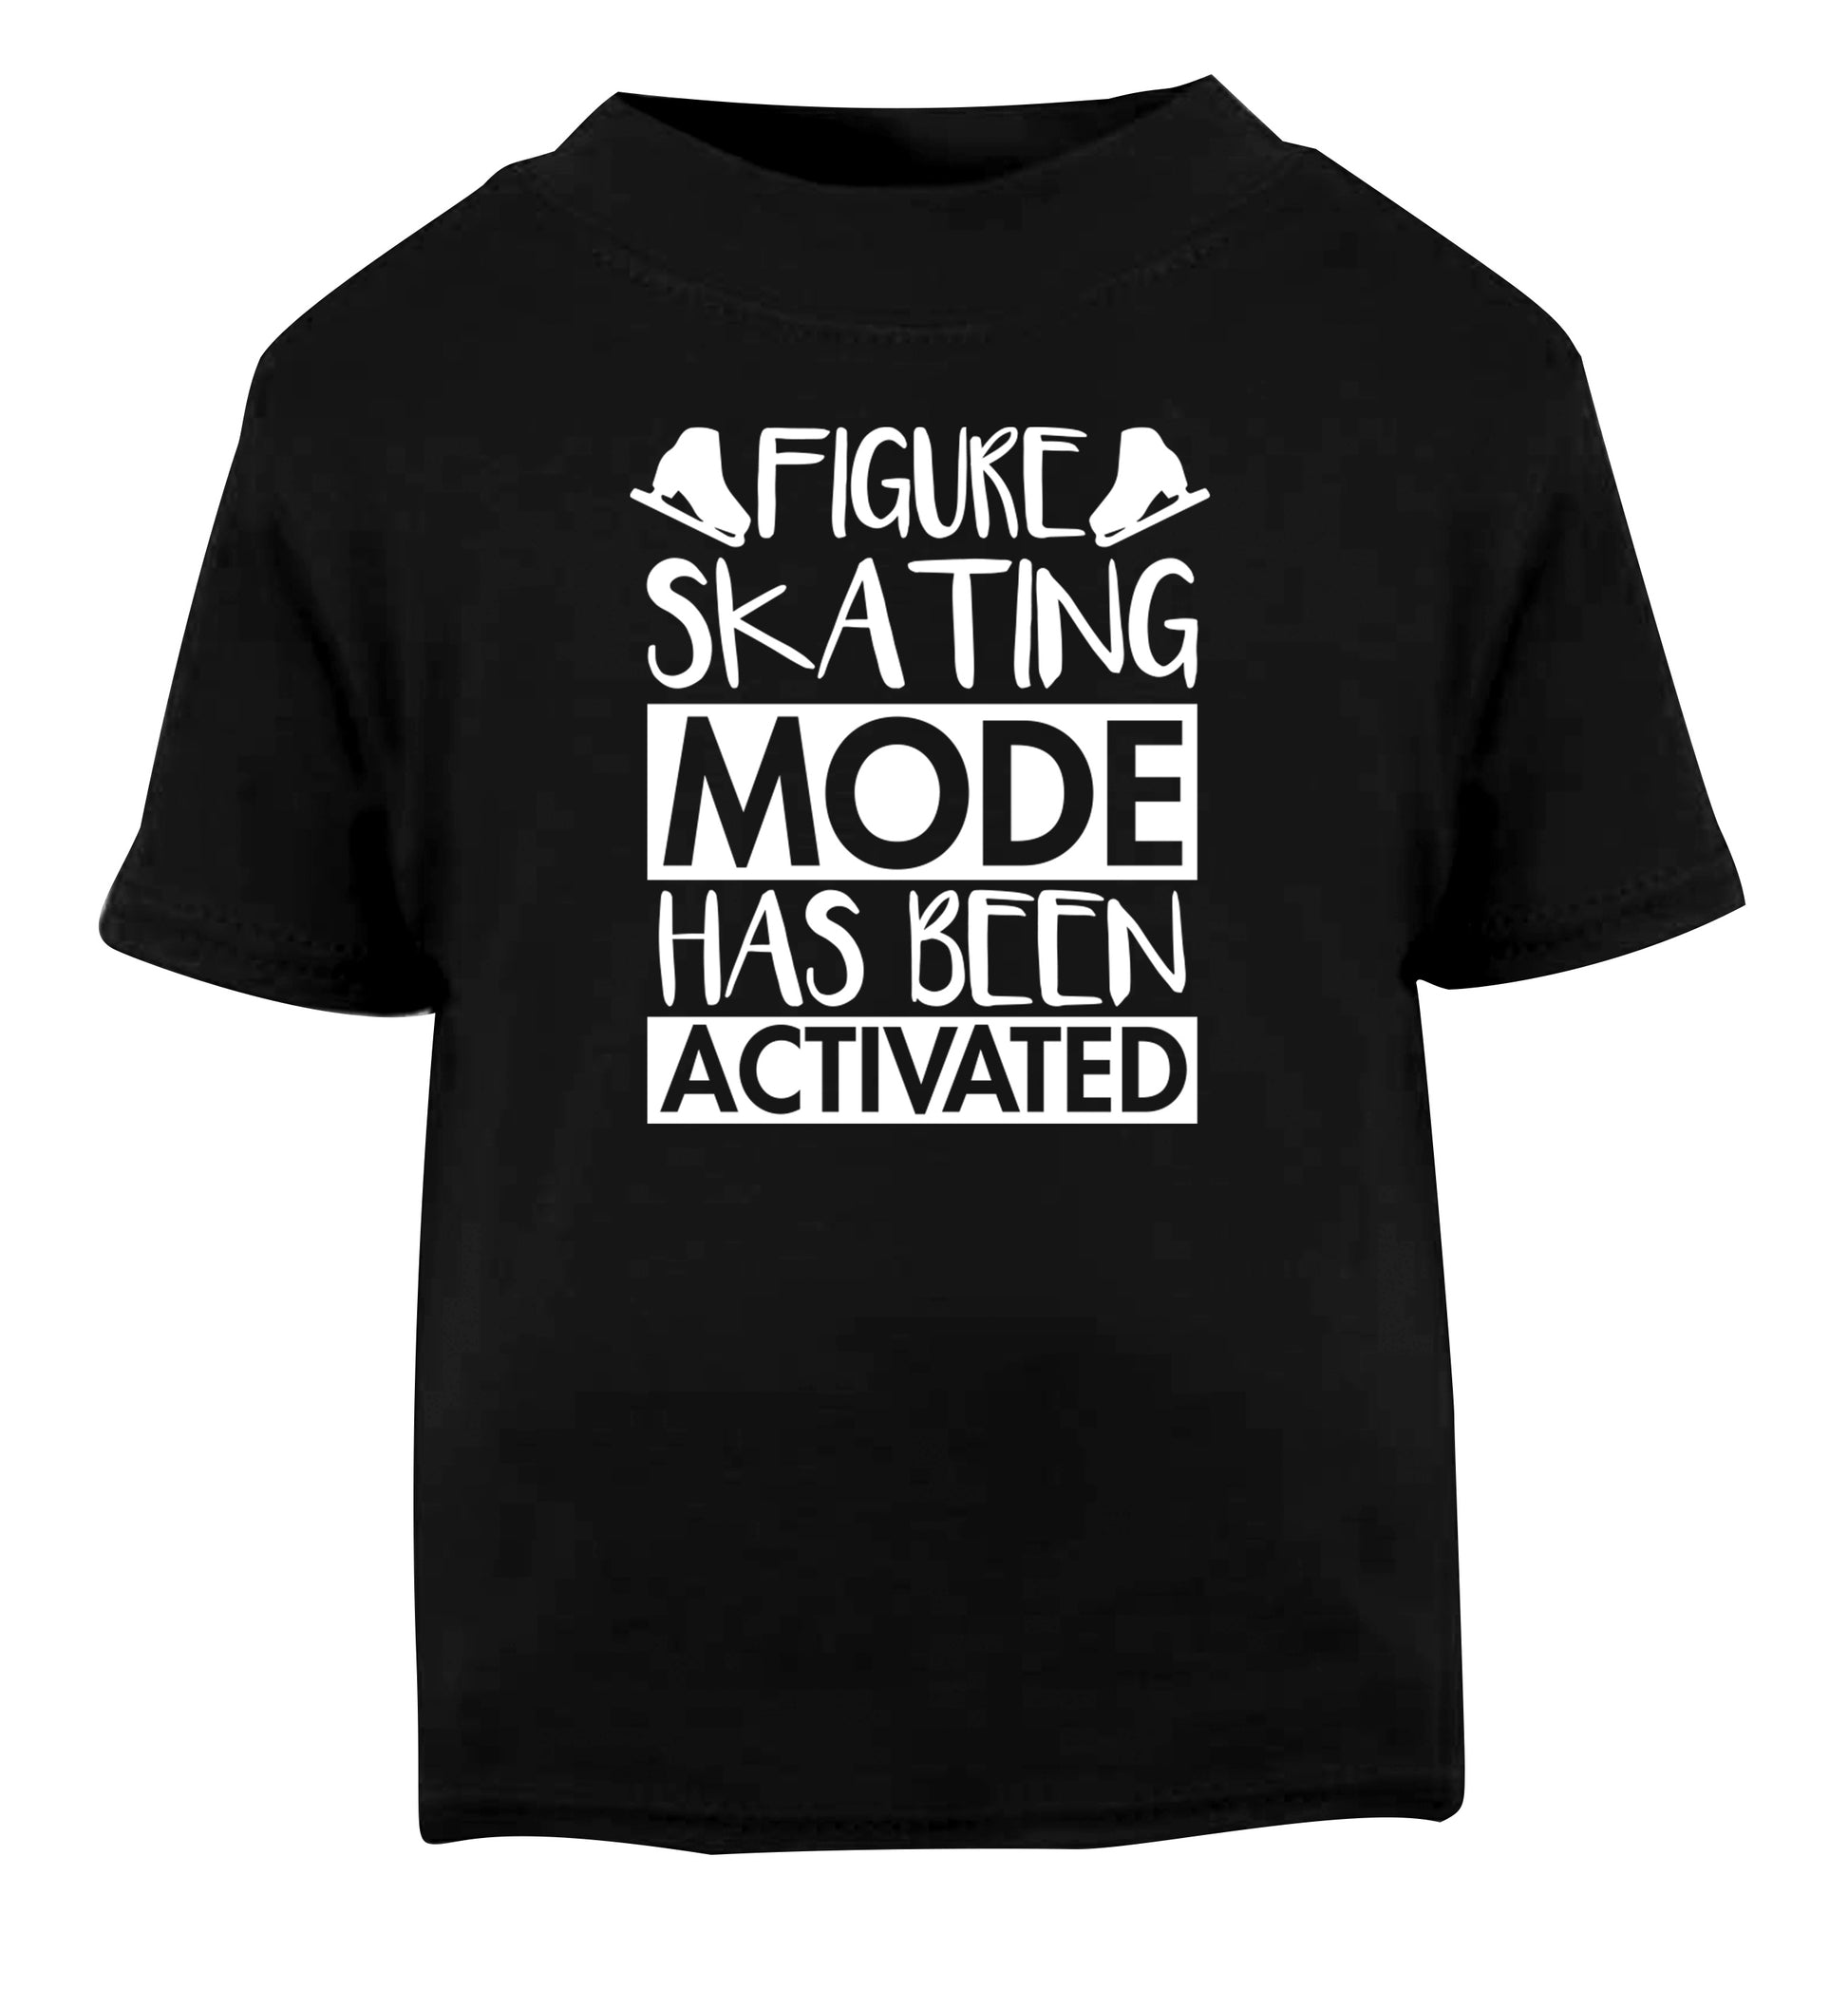 Figure skating mode activated Black Baby Toddler Tshirt 2 years